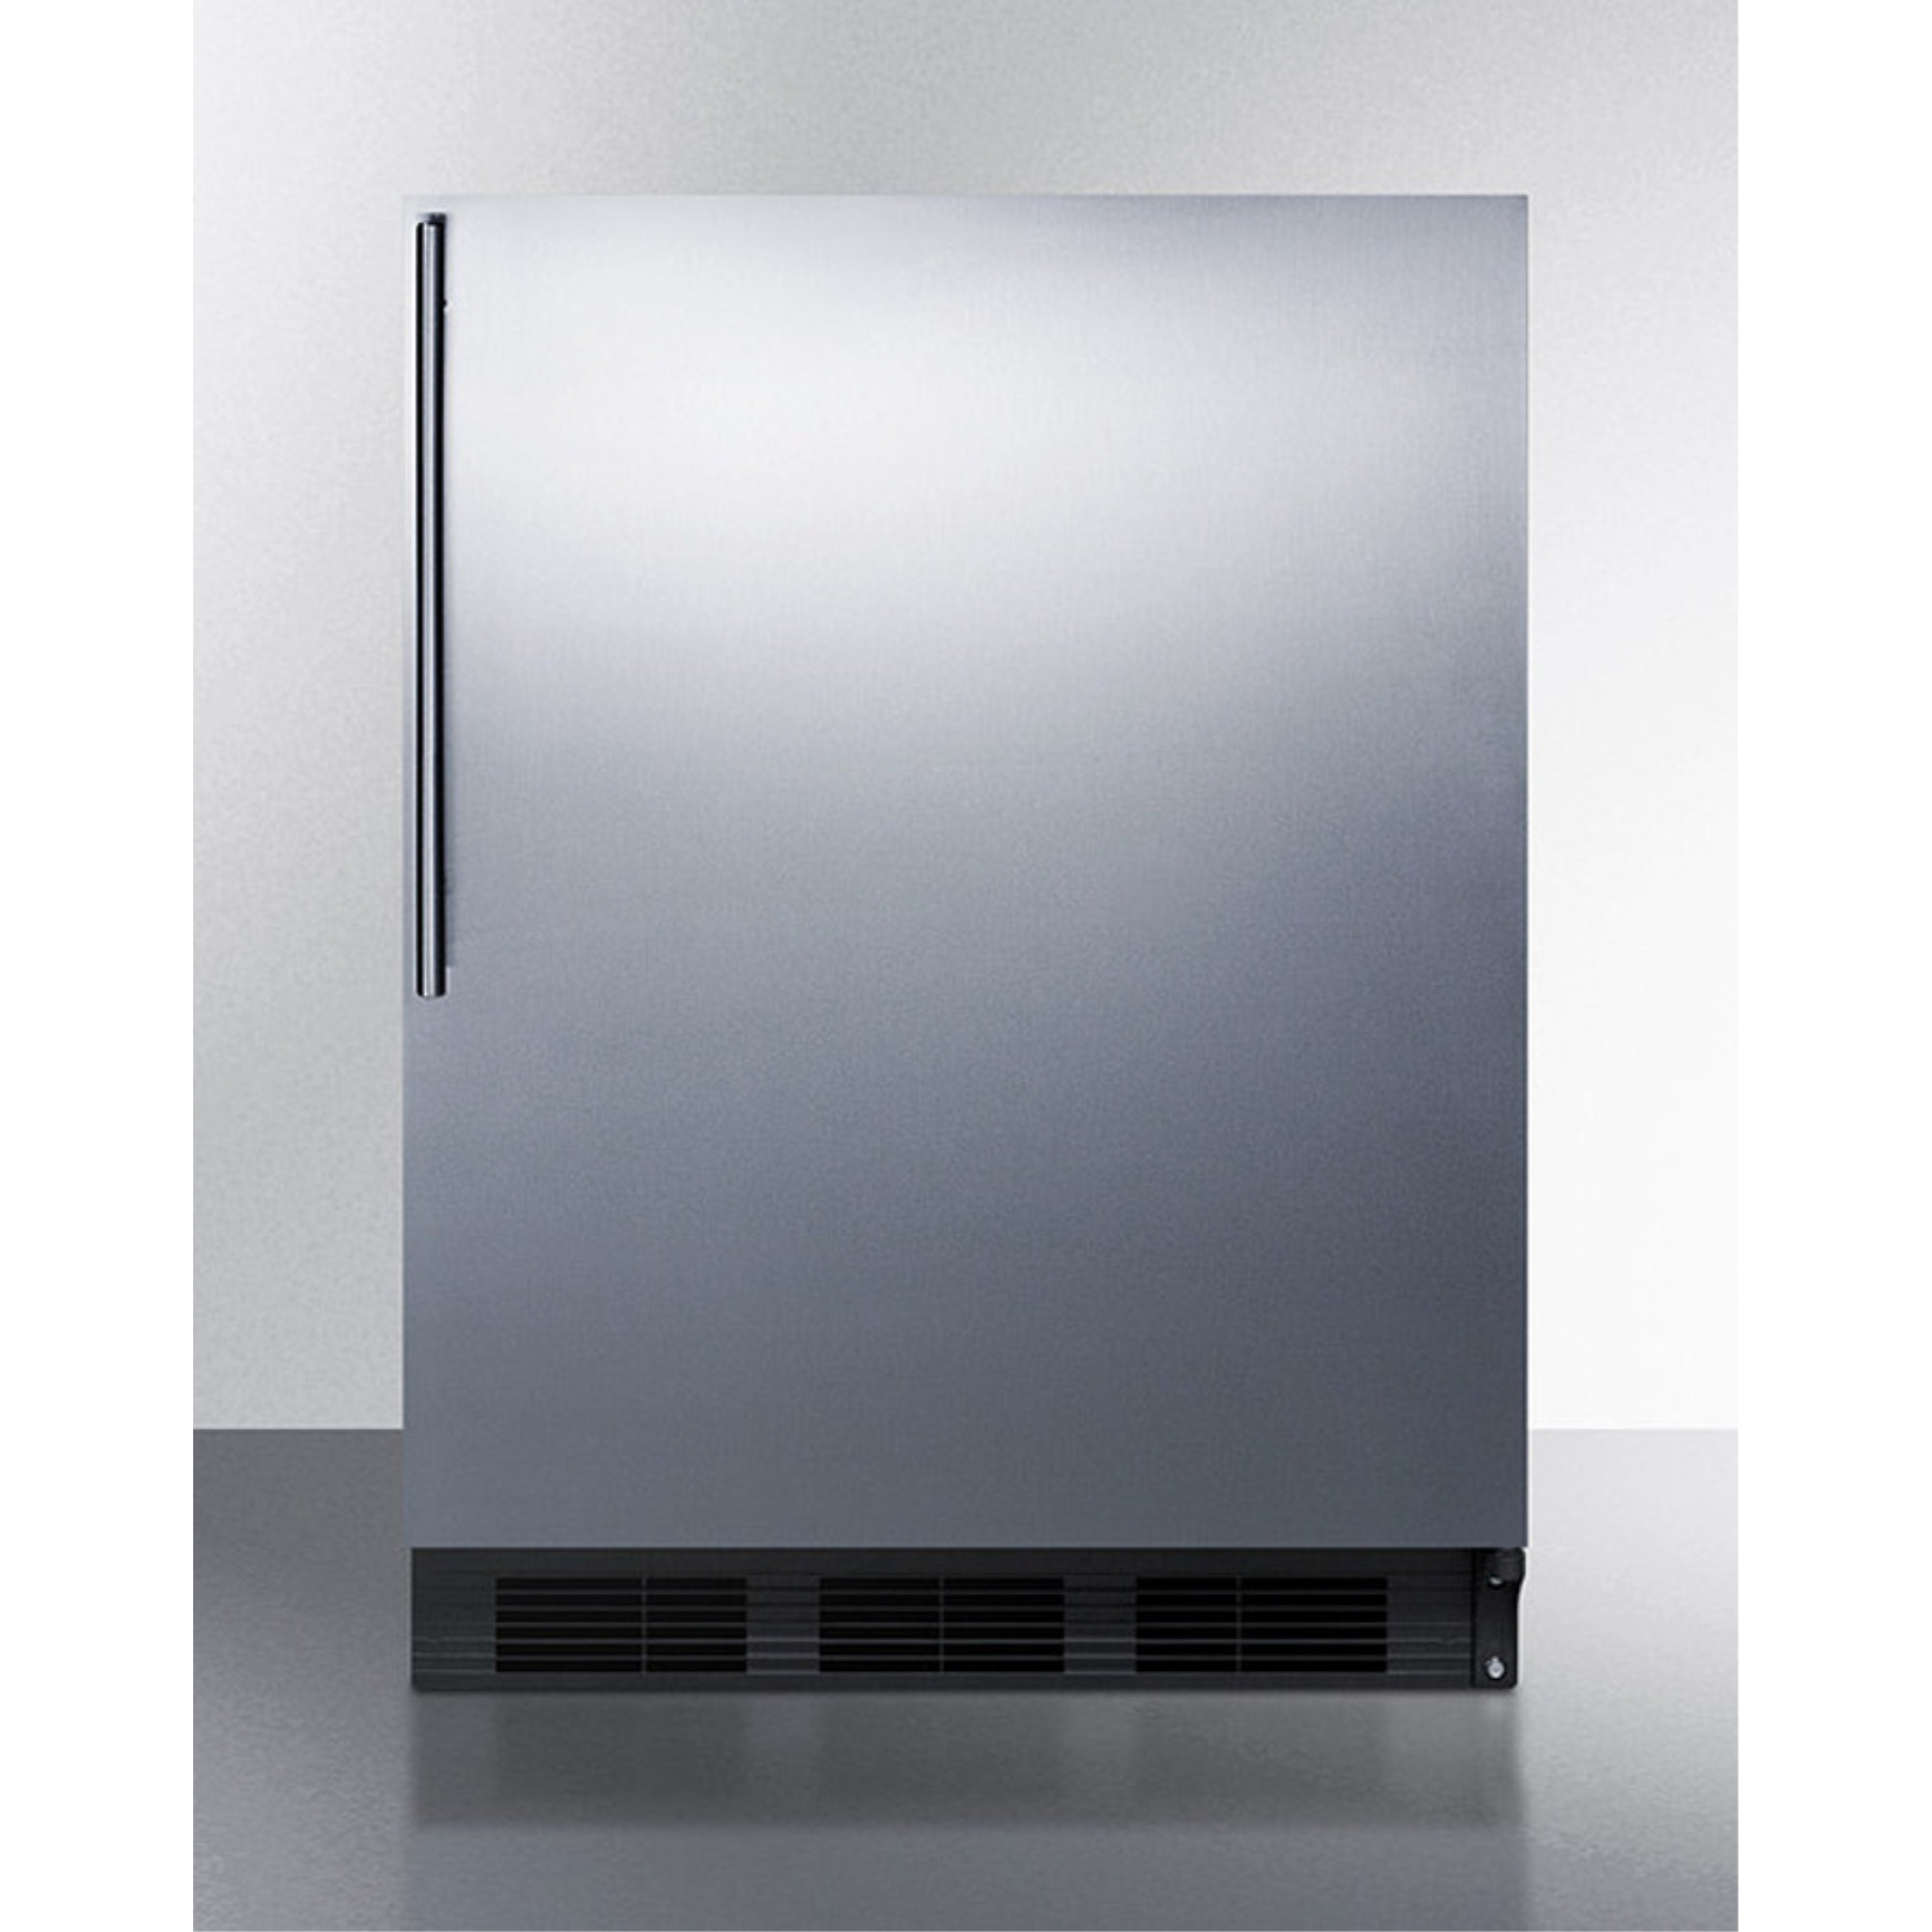 AccuCold ADA compliant all-refrigerator for built-in general purpose use, auto defrost w/stainless steel wrapped door, thin handle, and